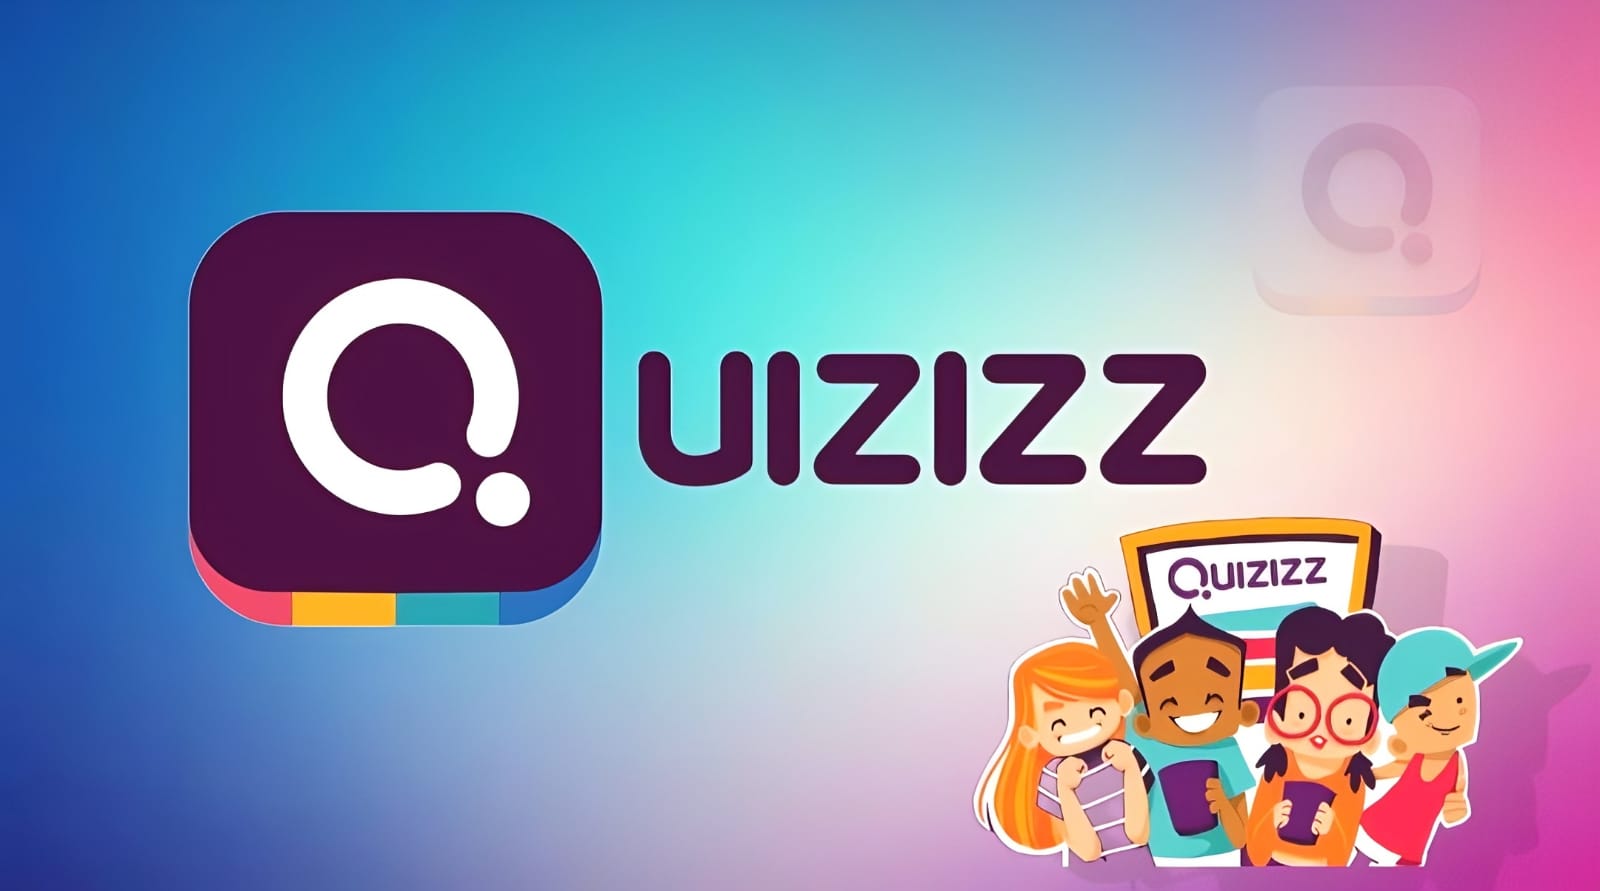 The Qiuzziz Revolution: Transforming Learning through Interactive Experiences